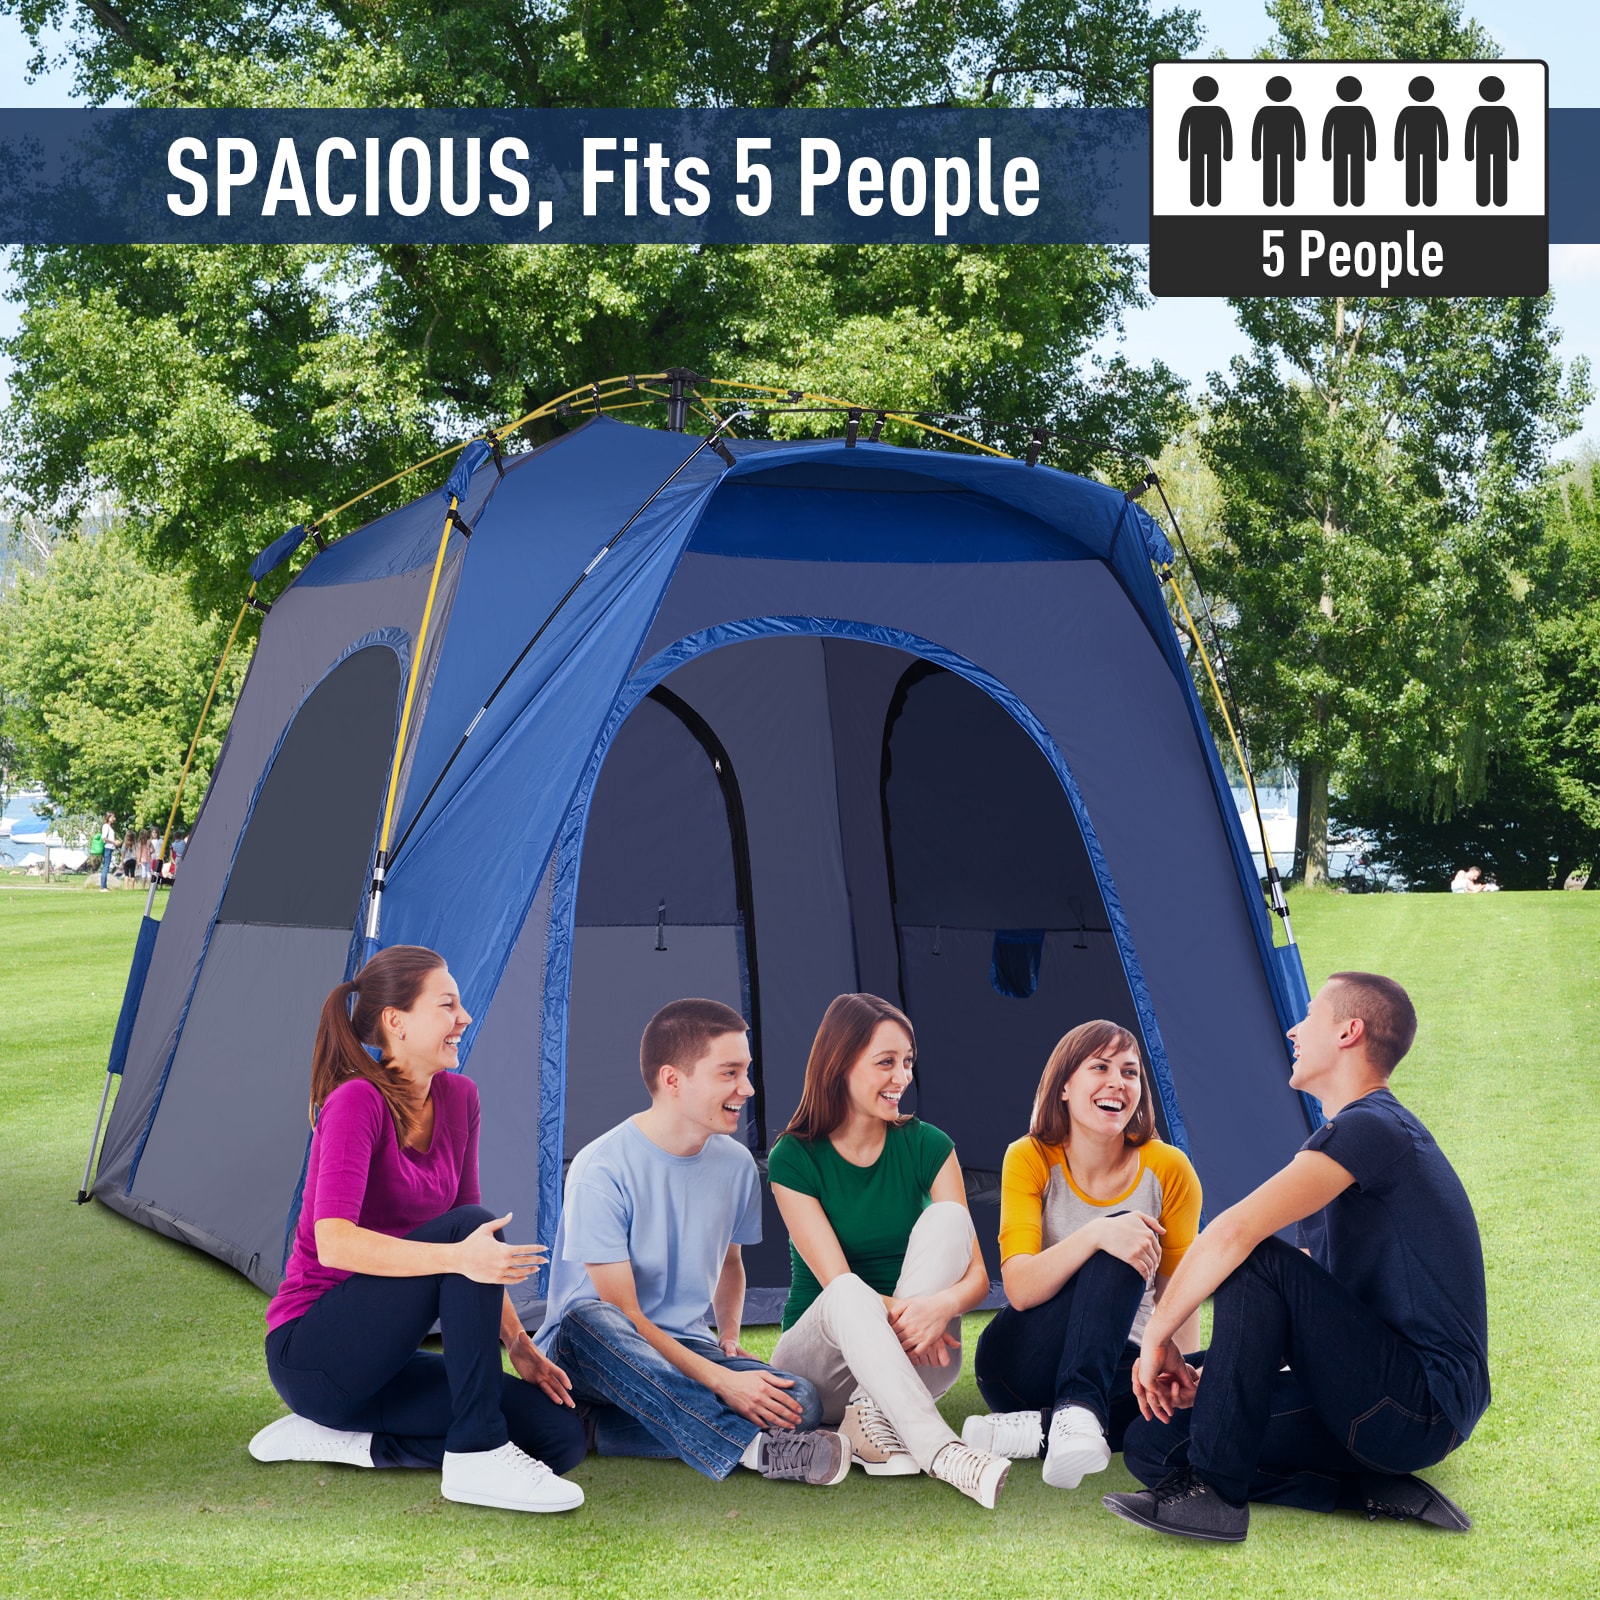 Outsunny Blue 3 Season 5 Person Automatic Hydraulic Pop Up Camping Tent -  Lightweight and Spacious Polyester Tent for Outdoor Adventures